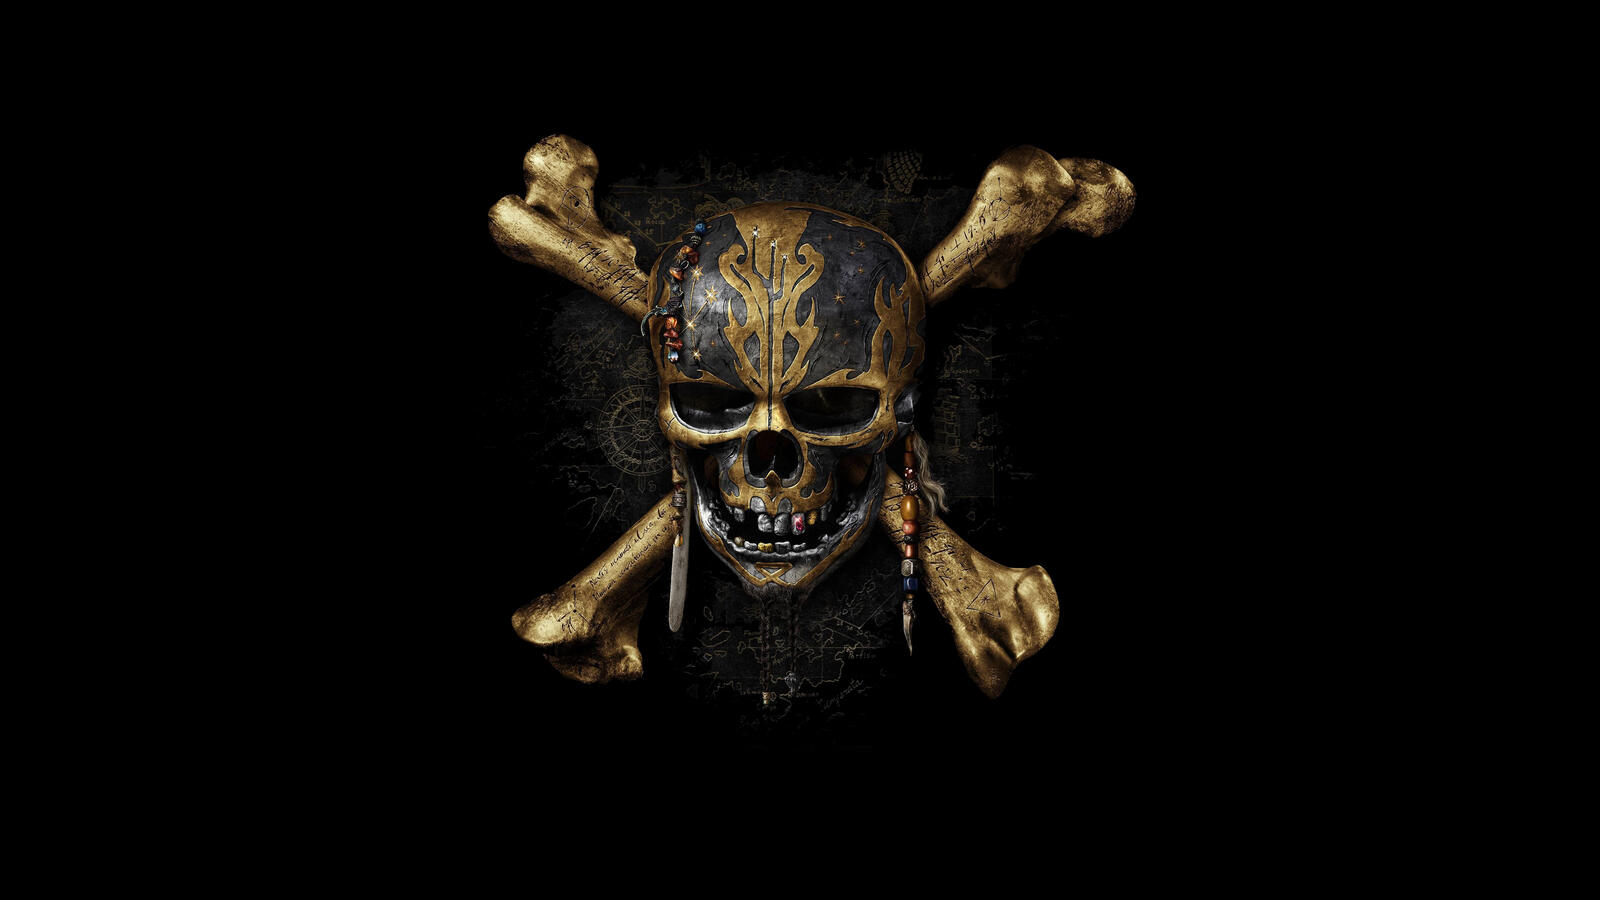 Wallpapers pirates of the caribbean dead men tell no tales 2017 Movies skull on the desktop